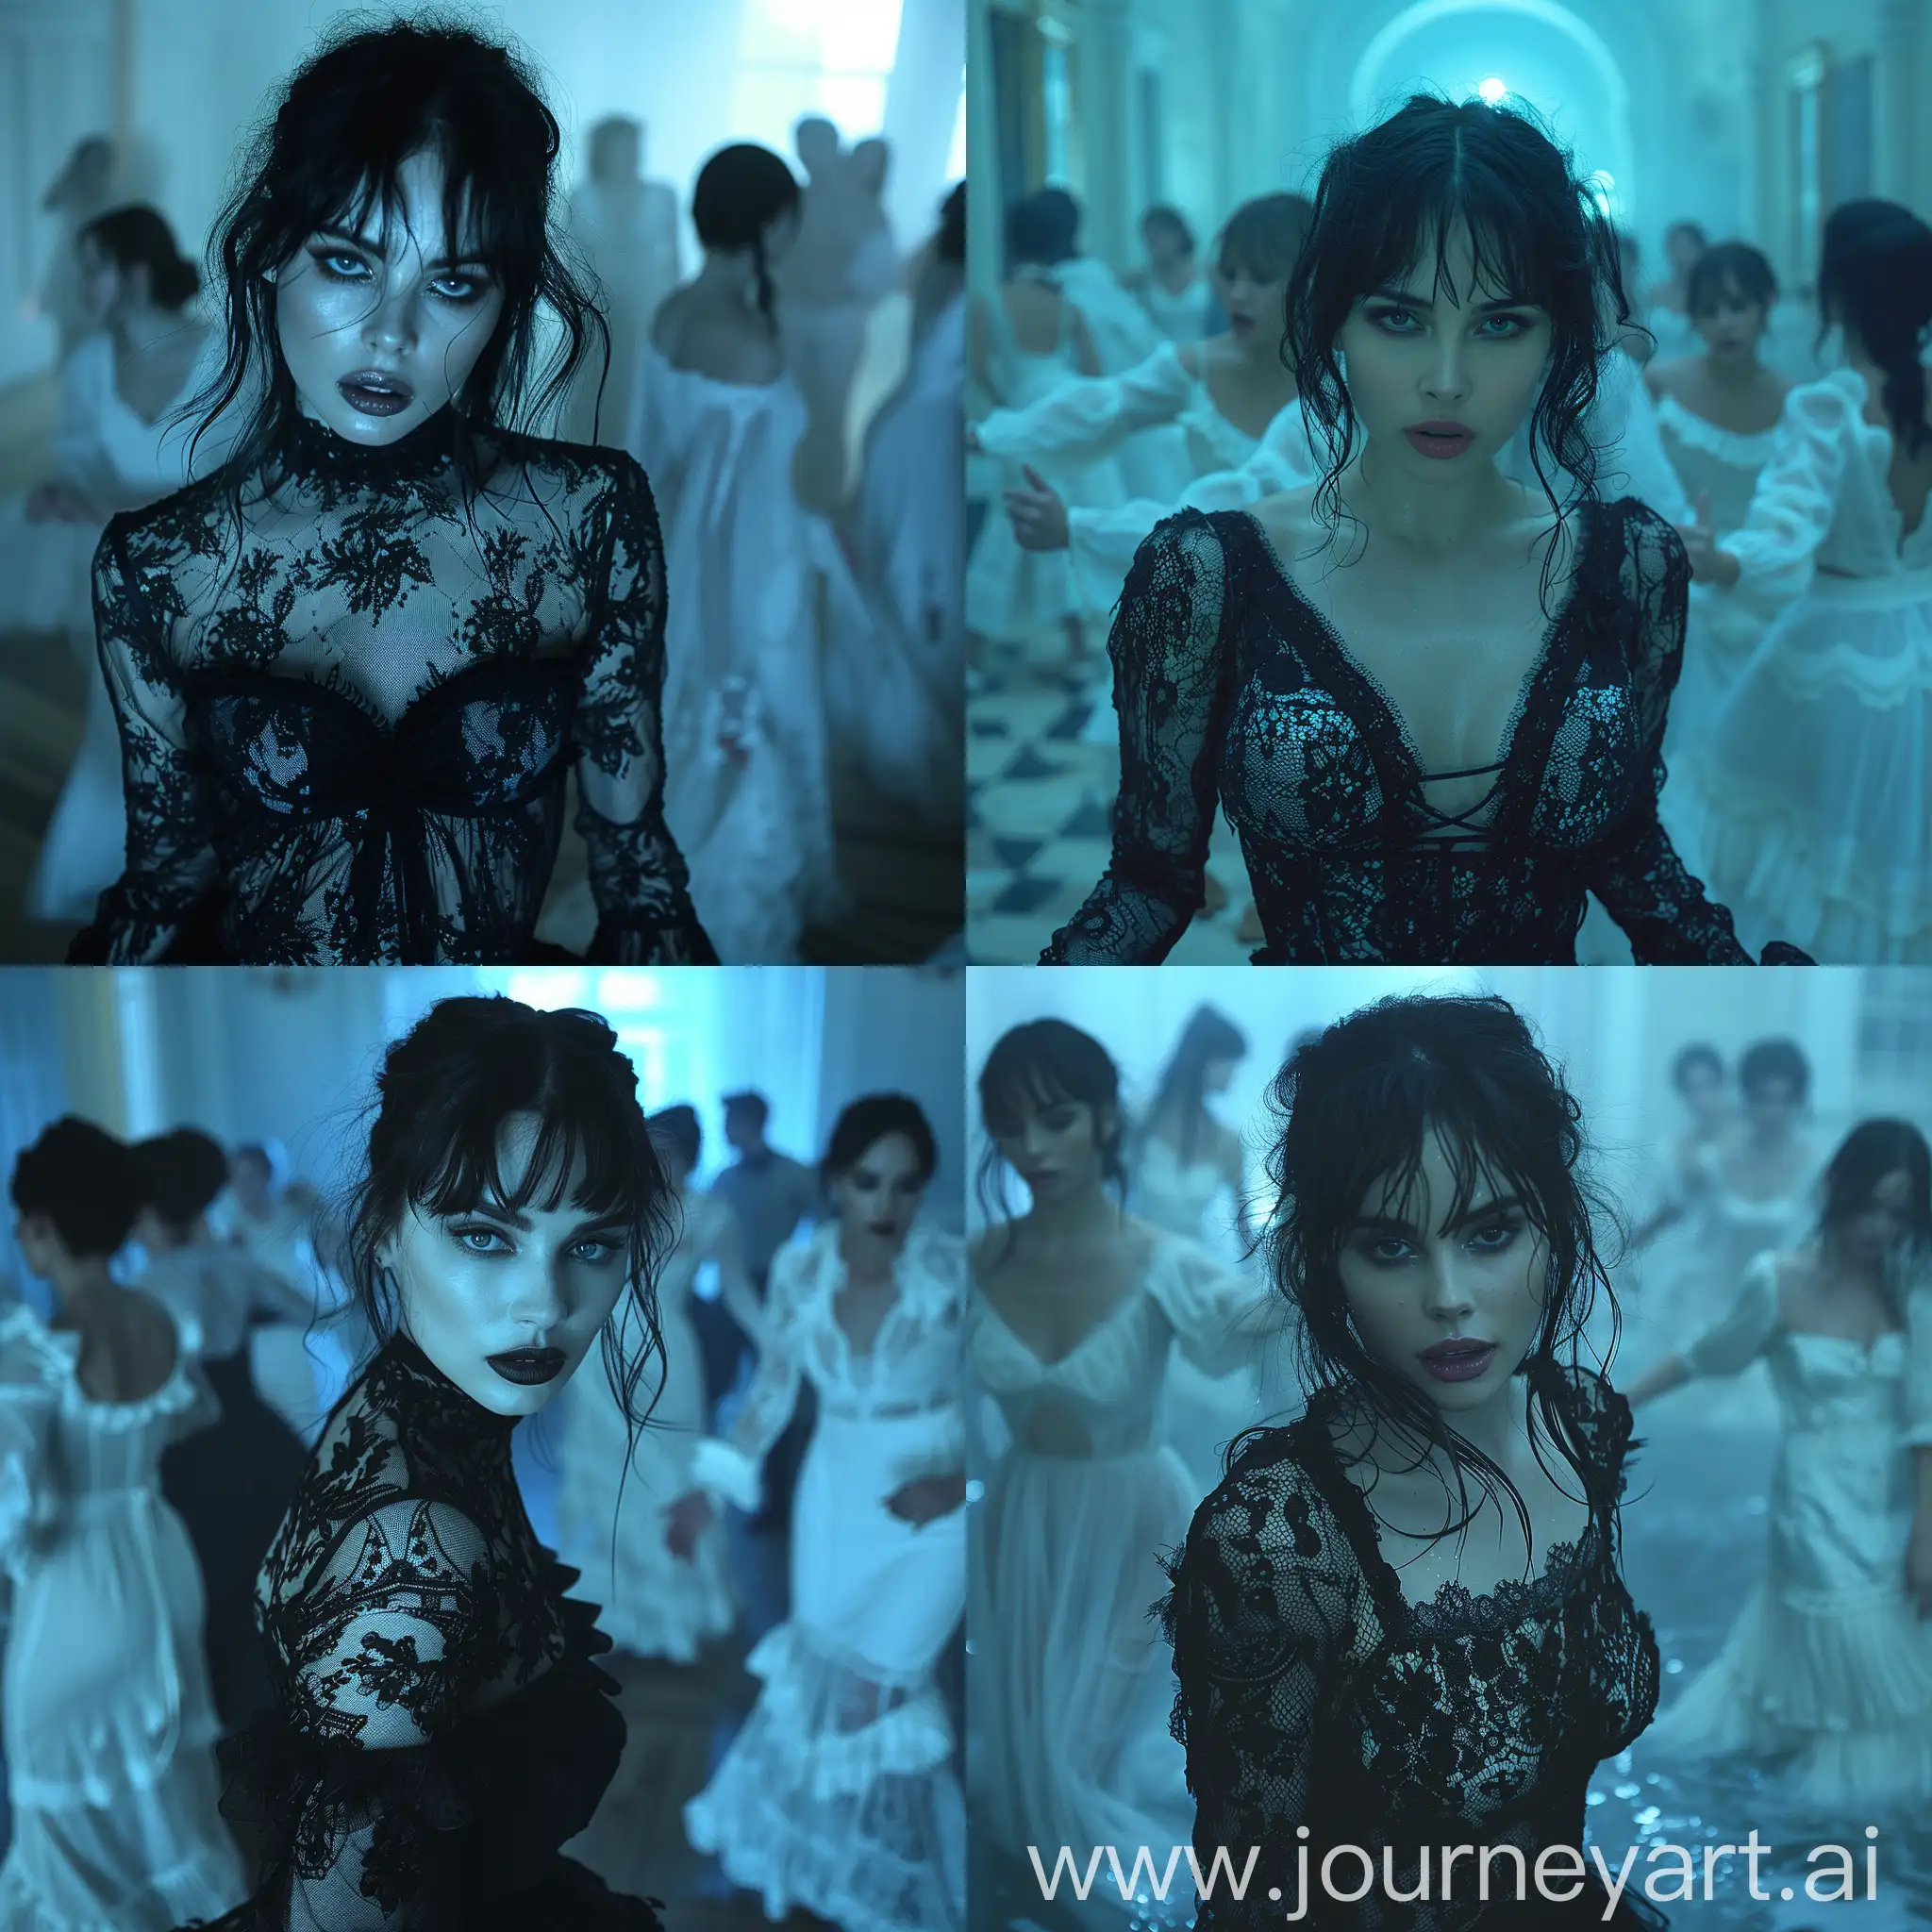 a scene set in a dimly lit room that gives off the ambience of a dance setting. The focus is on a woman in the foreground who is dressed in a black, lace-embellished dress, which contrasts with the surrounding individuals who are all dressed in white. The woman has dark hair styled with bangs and is captured in a pose that suggests movement, as if she's in the midst of dancing. Her expression is intense and somewhat dramatic, contributing to the overall moody atmosphere of the scene.

The background shows other people who are also dancing. They appear to be paired off, spreading out across the room, bathed in a cool blue light. The lighting gives off a cinematic feel and adds to the mysterious or somber vibe of the image. It's a dynamic scene that evokes a sense of story, possibly from a film or a theatrical production --stylize 750 --v 6